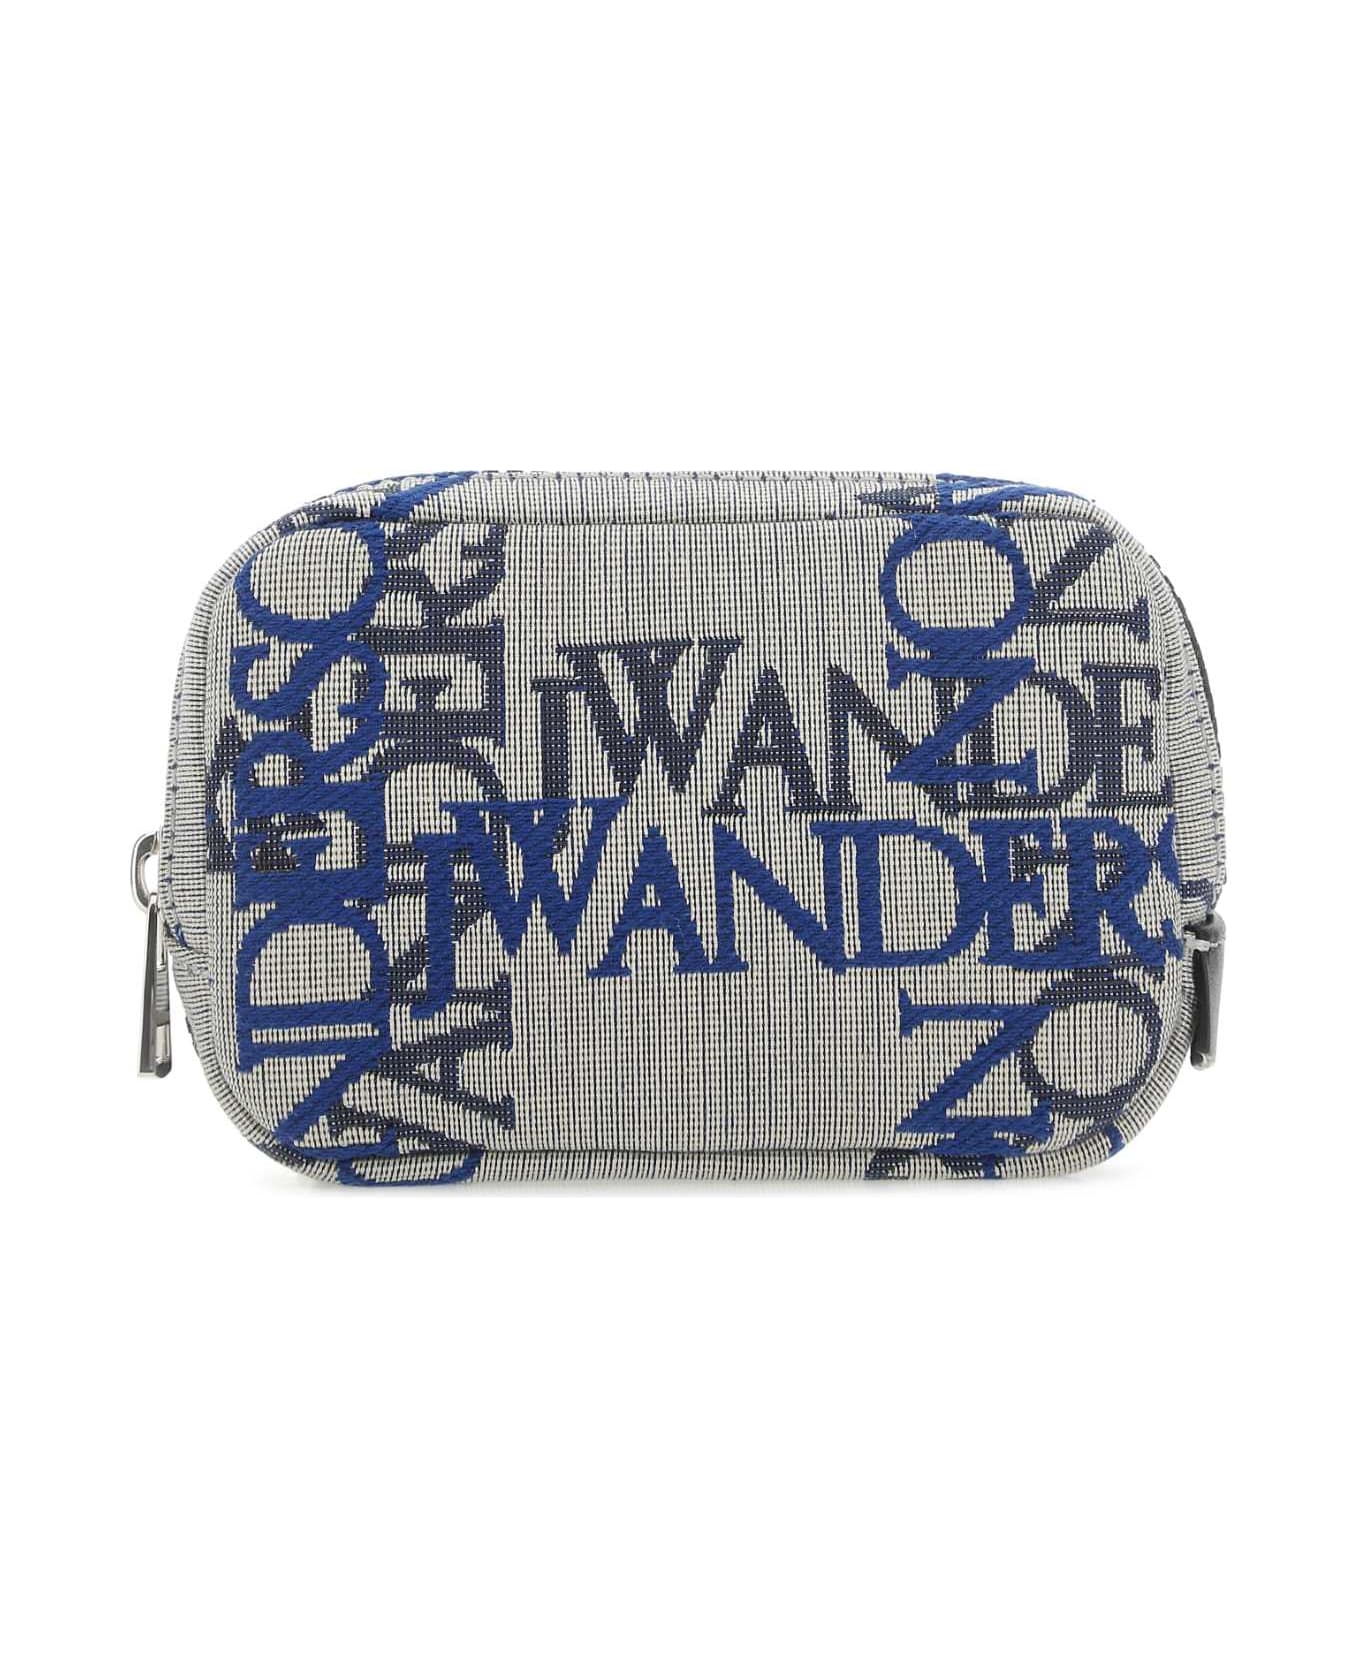 J.W. Anderson Embroidered Fabric Beauty Case - 614 トラベルバッグ